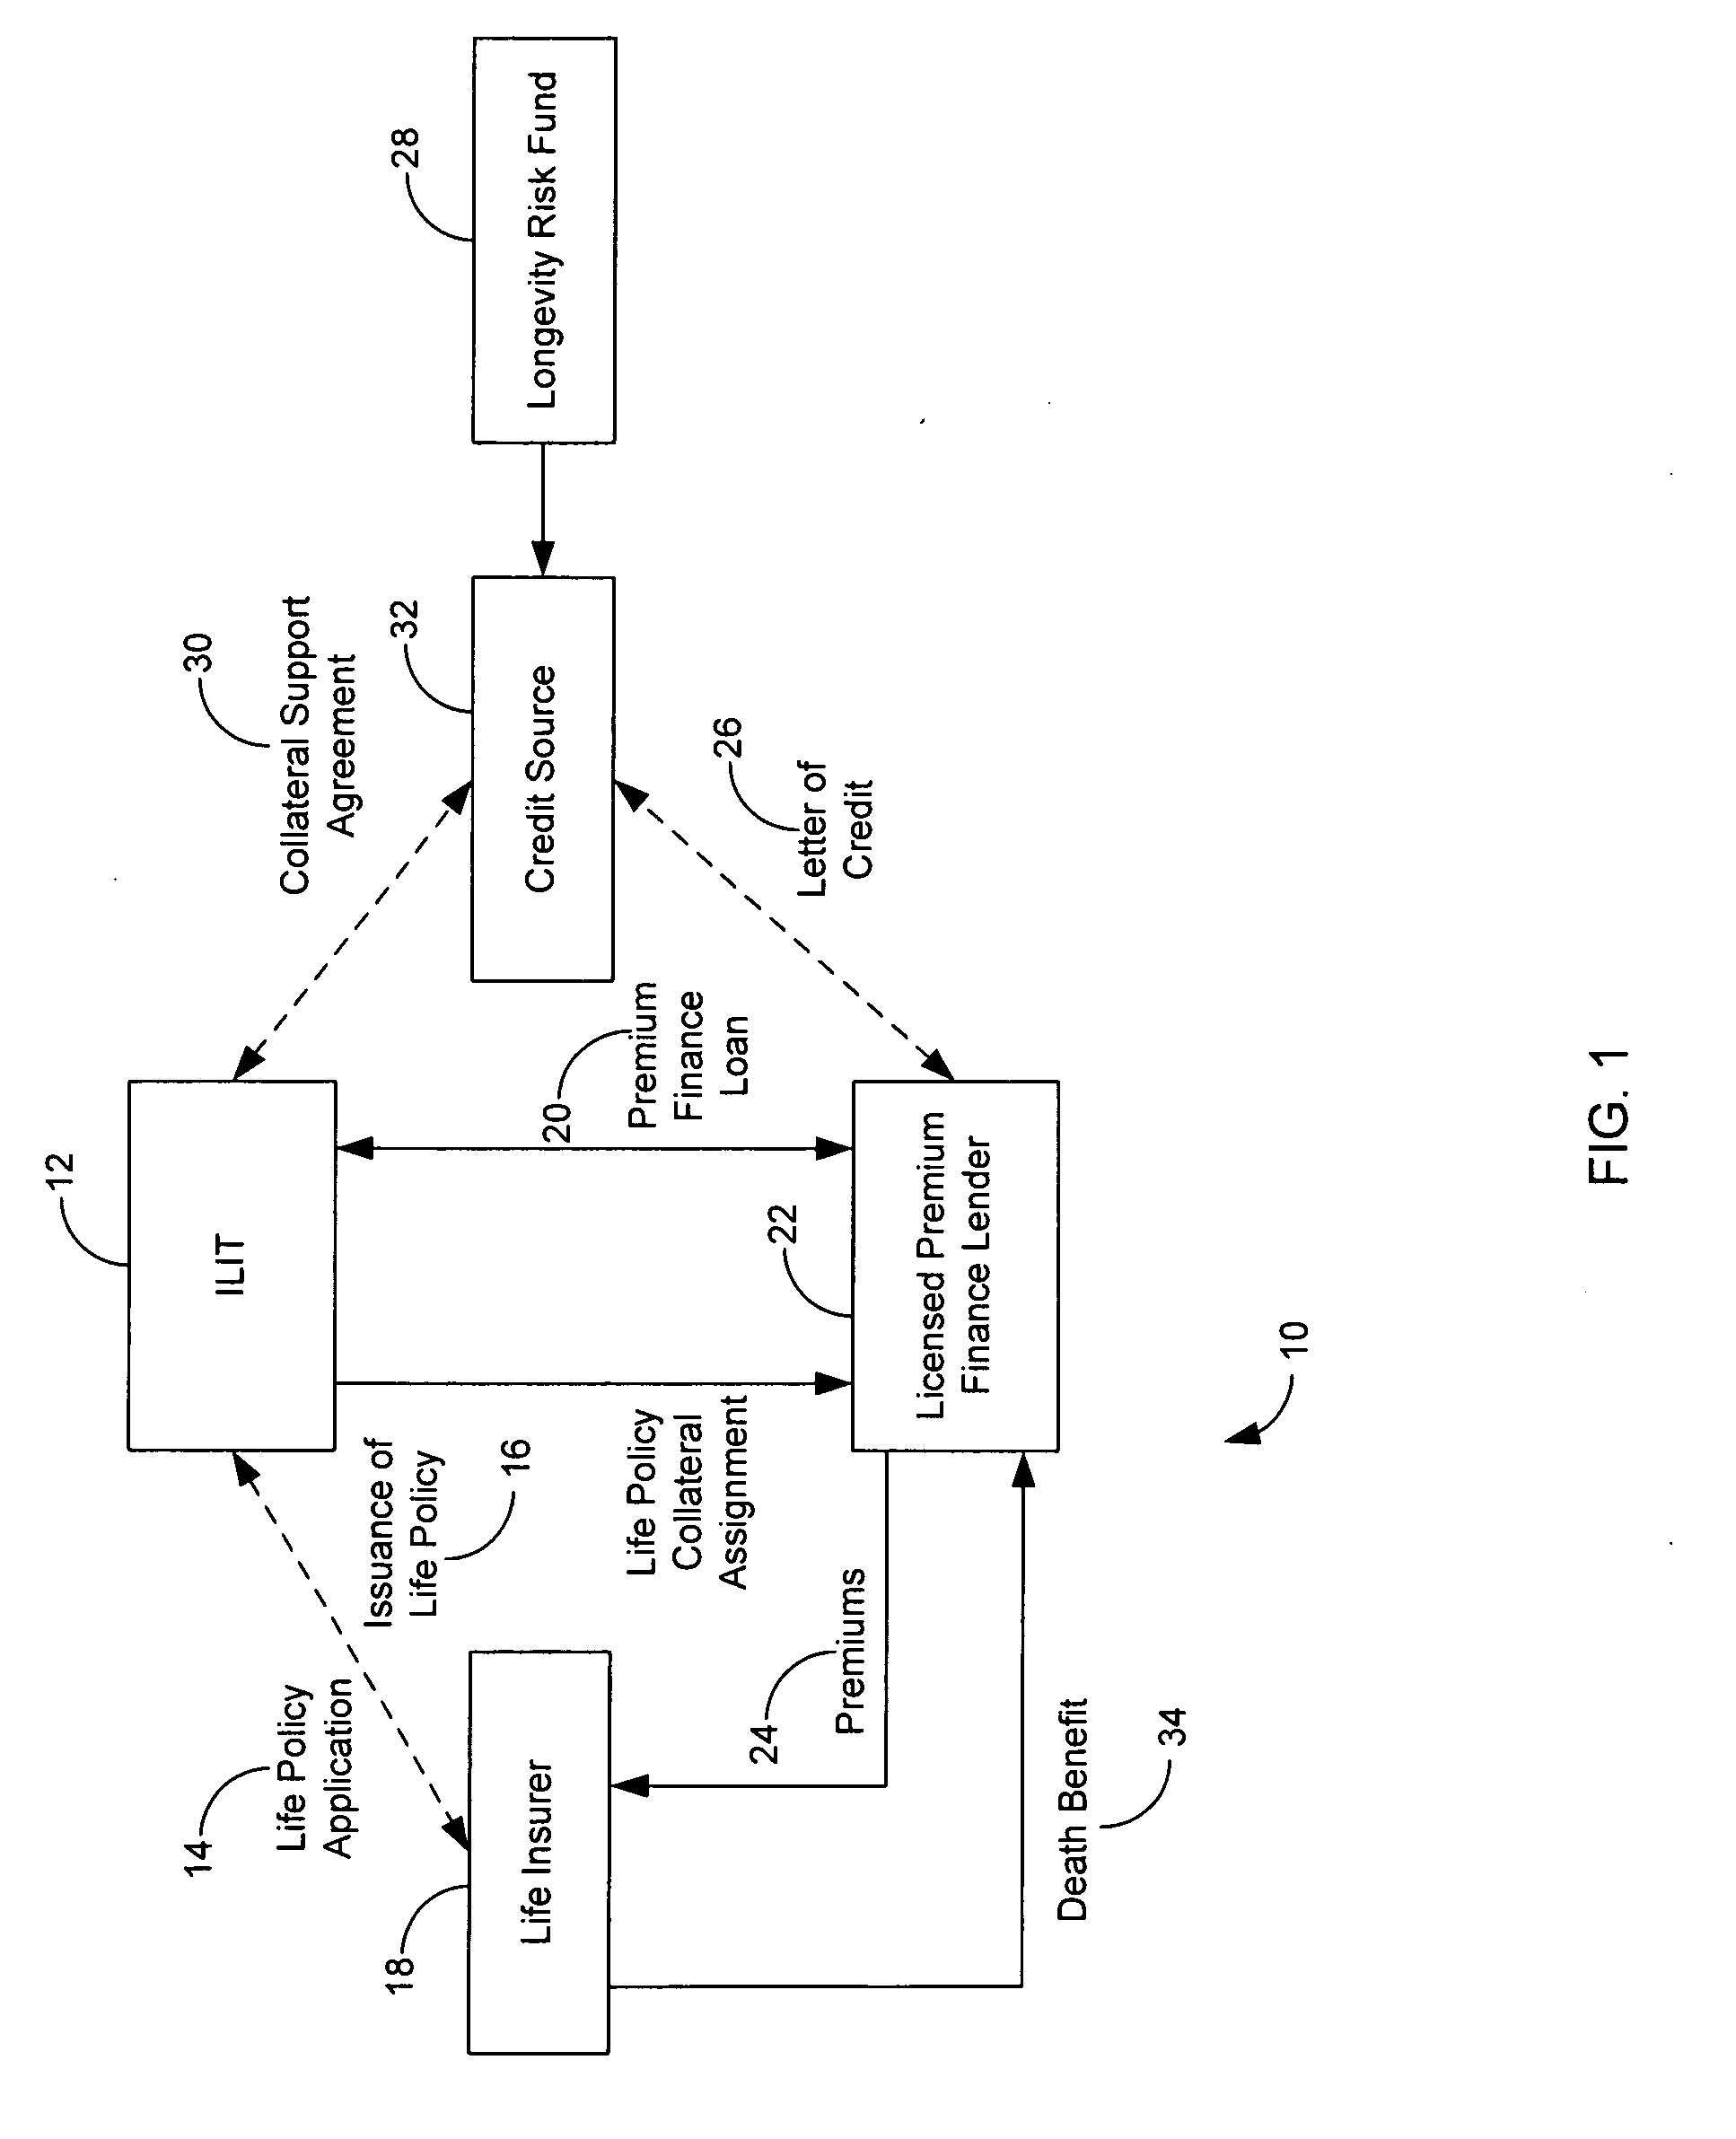 Systems and methods for securitizing longevity risk